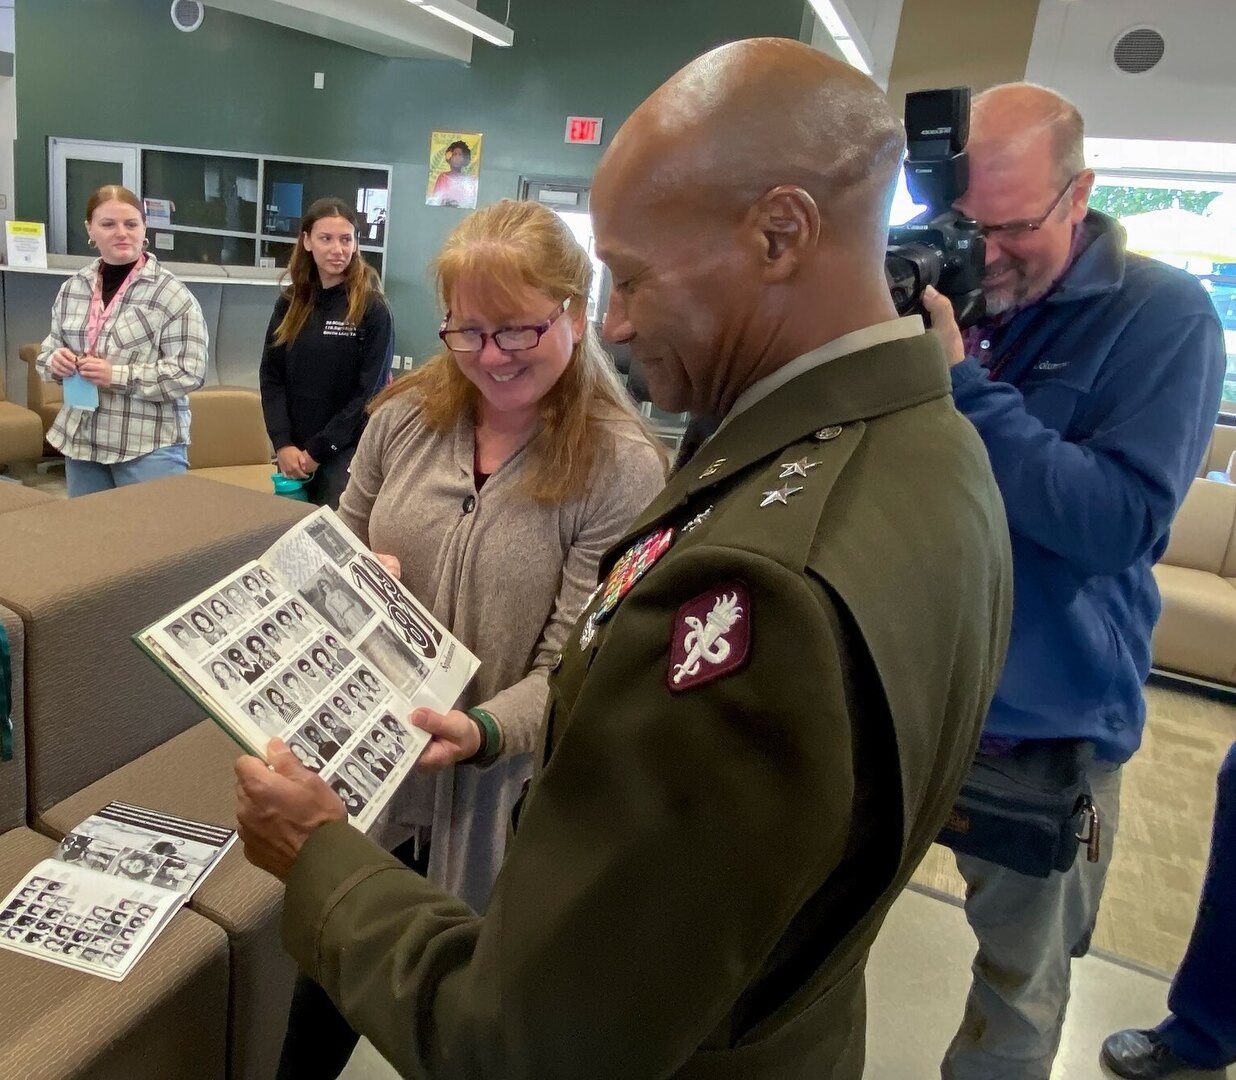 MEDCoE commanding general visits hometown to raise awareness and promote career opportunities